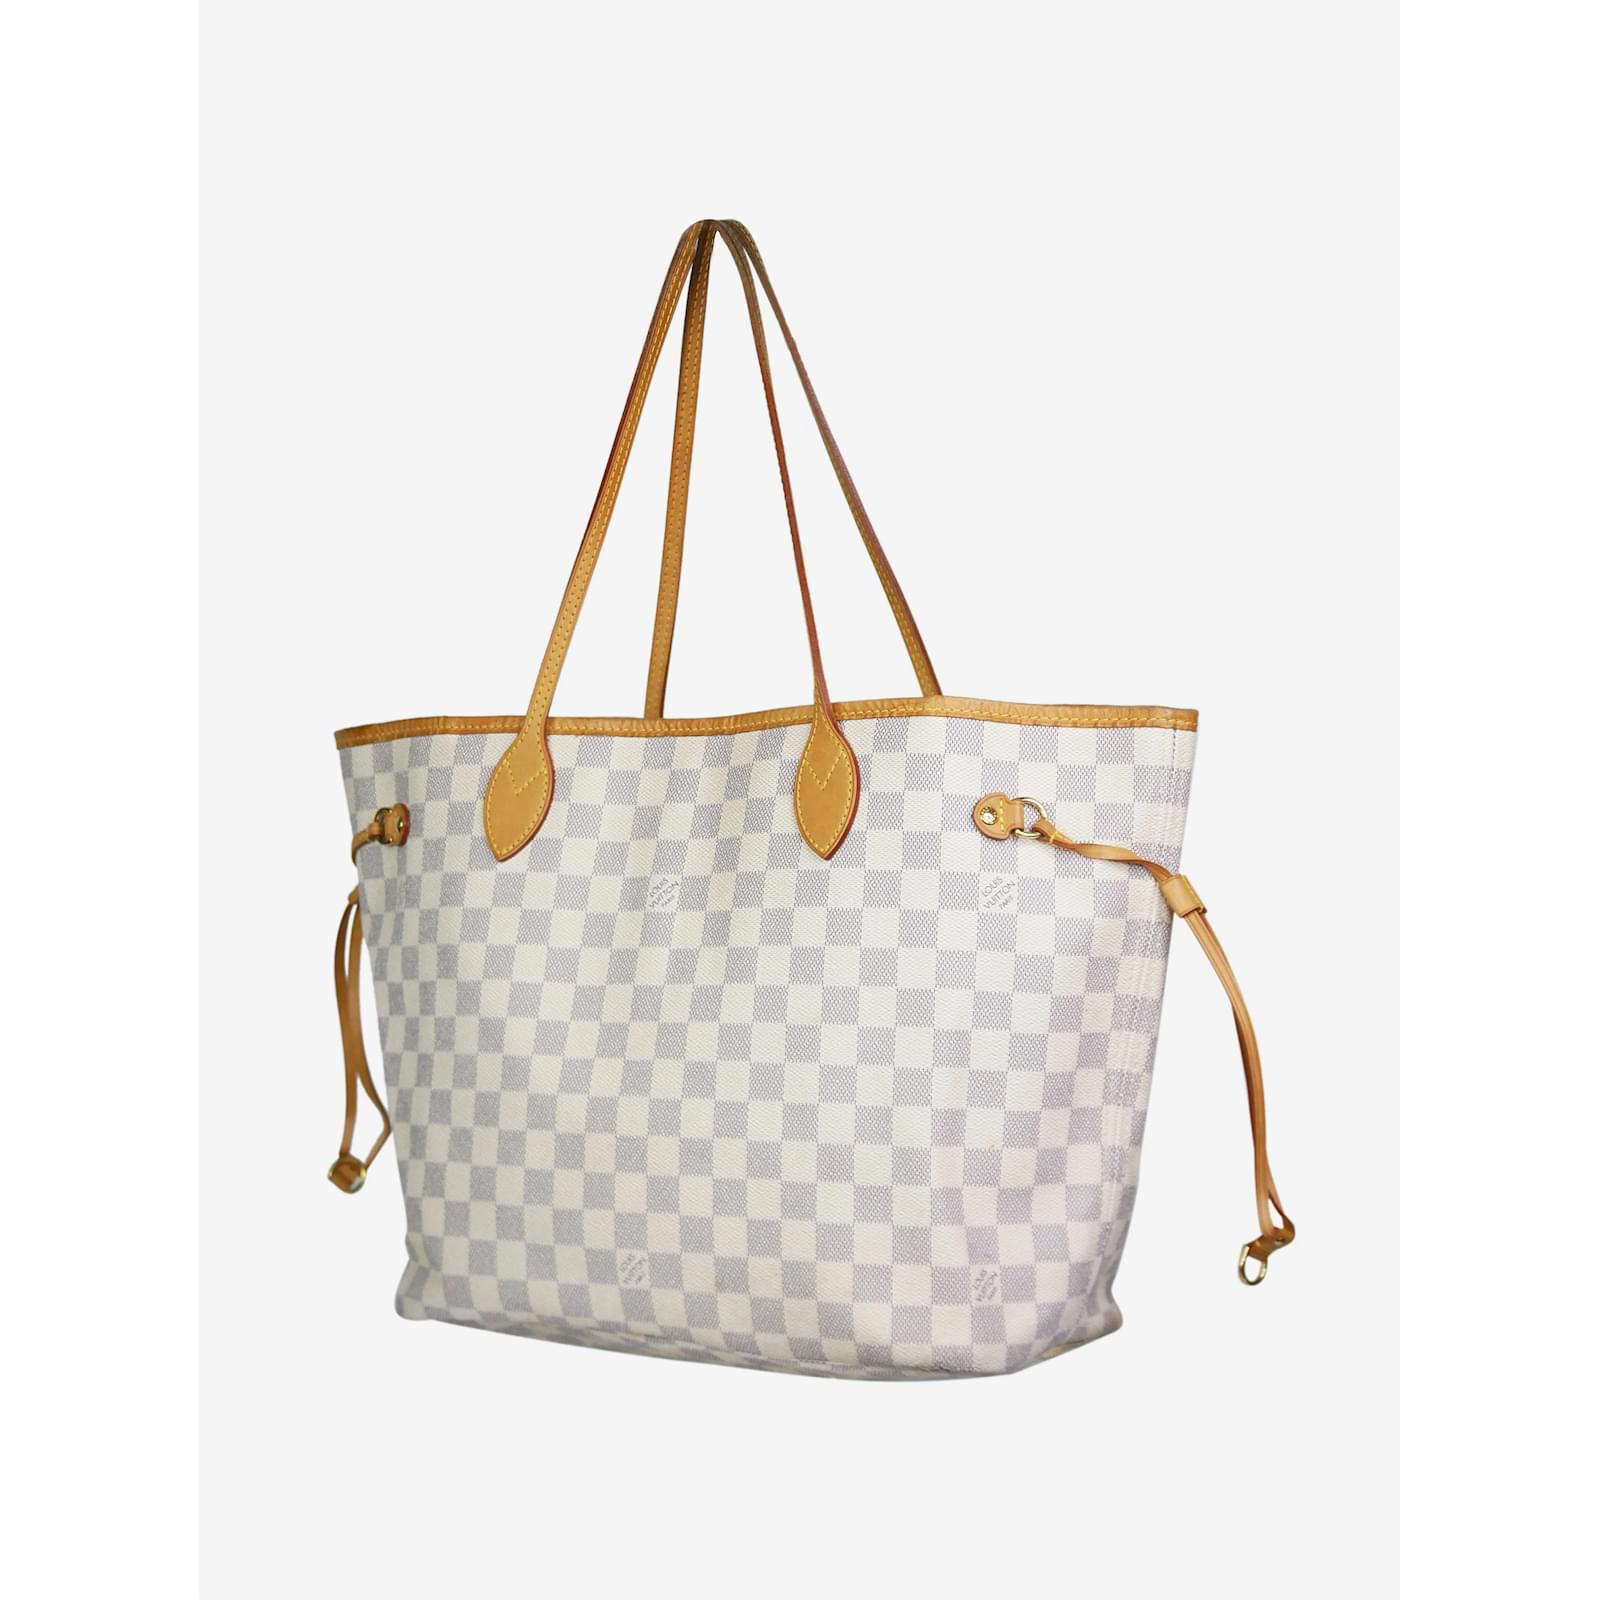 LOUIS VUITTON Damier Azur Neverfull MM Tote Bag N41605 LV Auth Used From  Japan